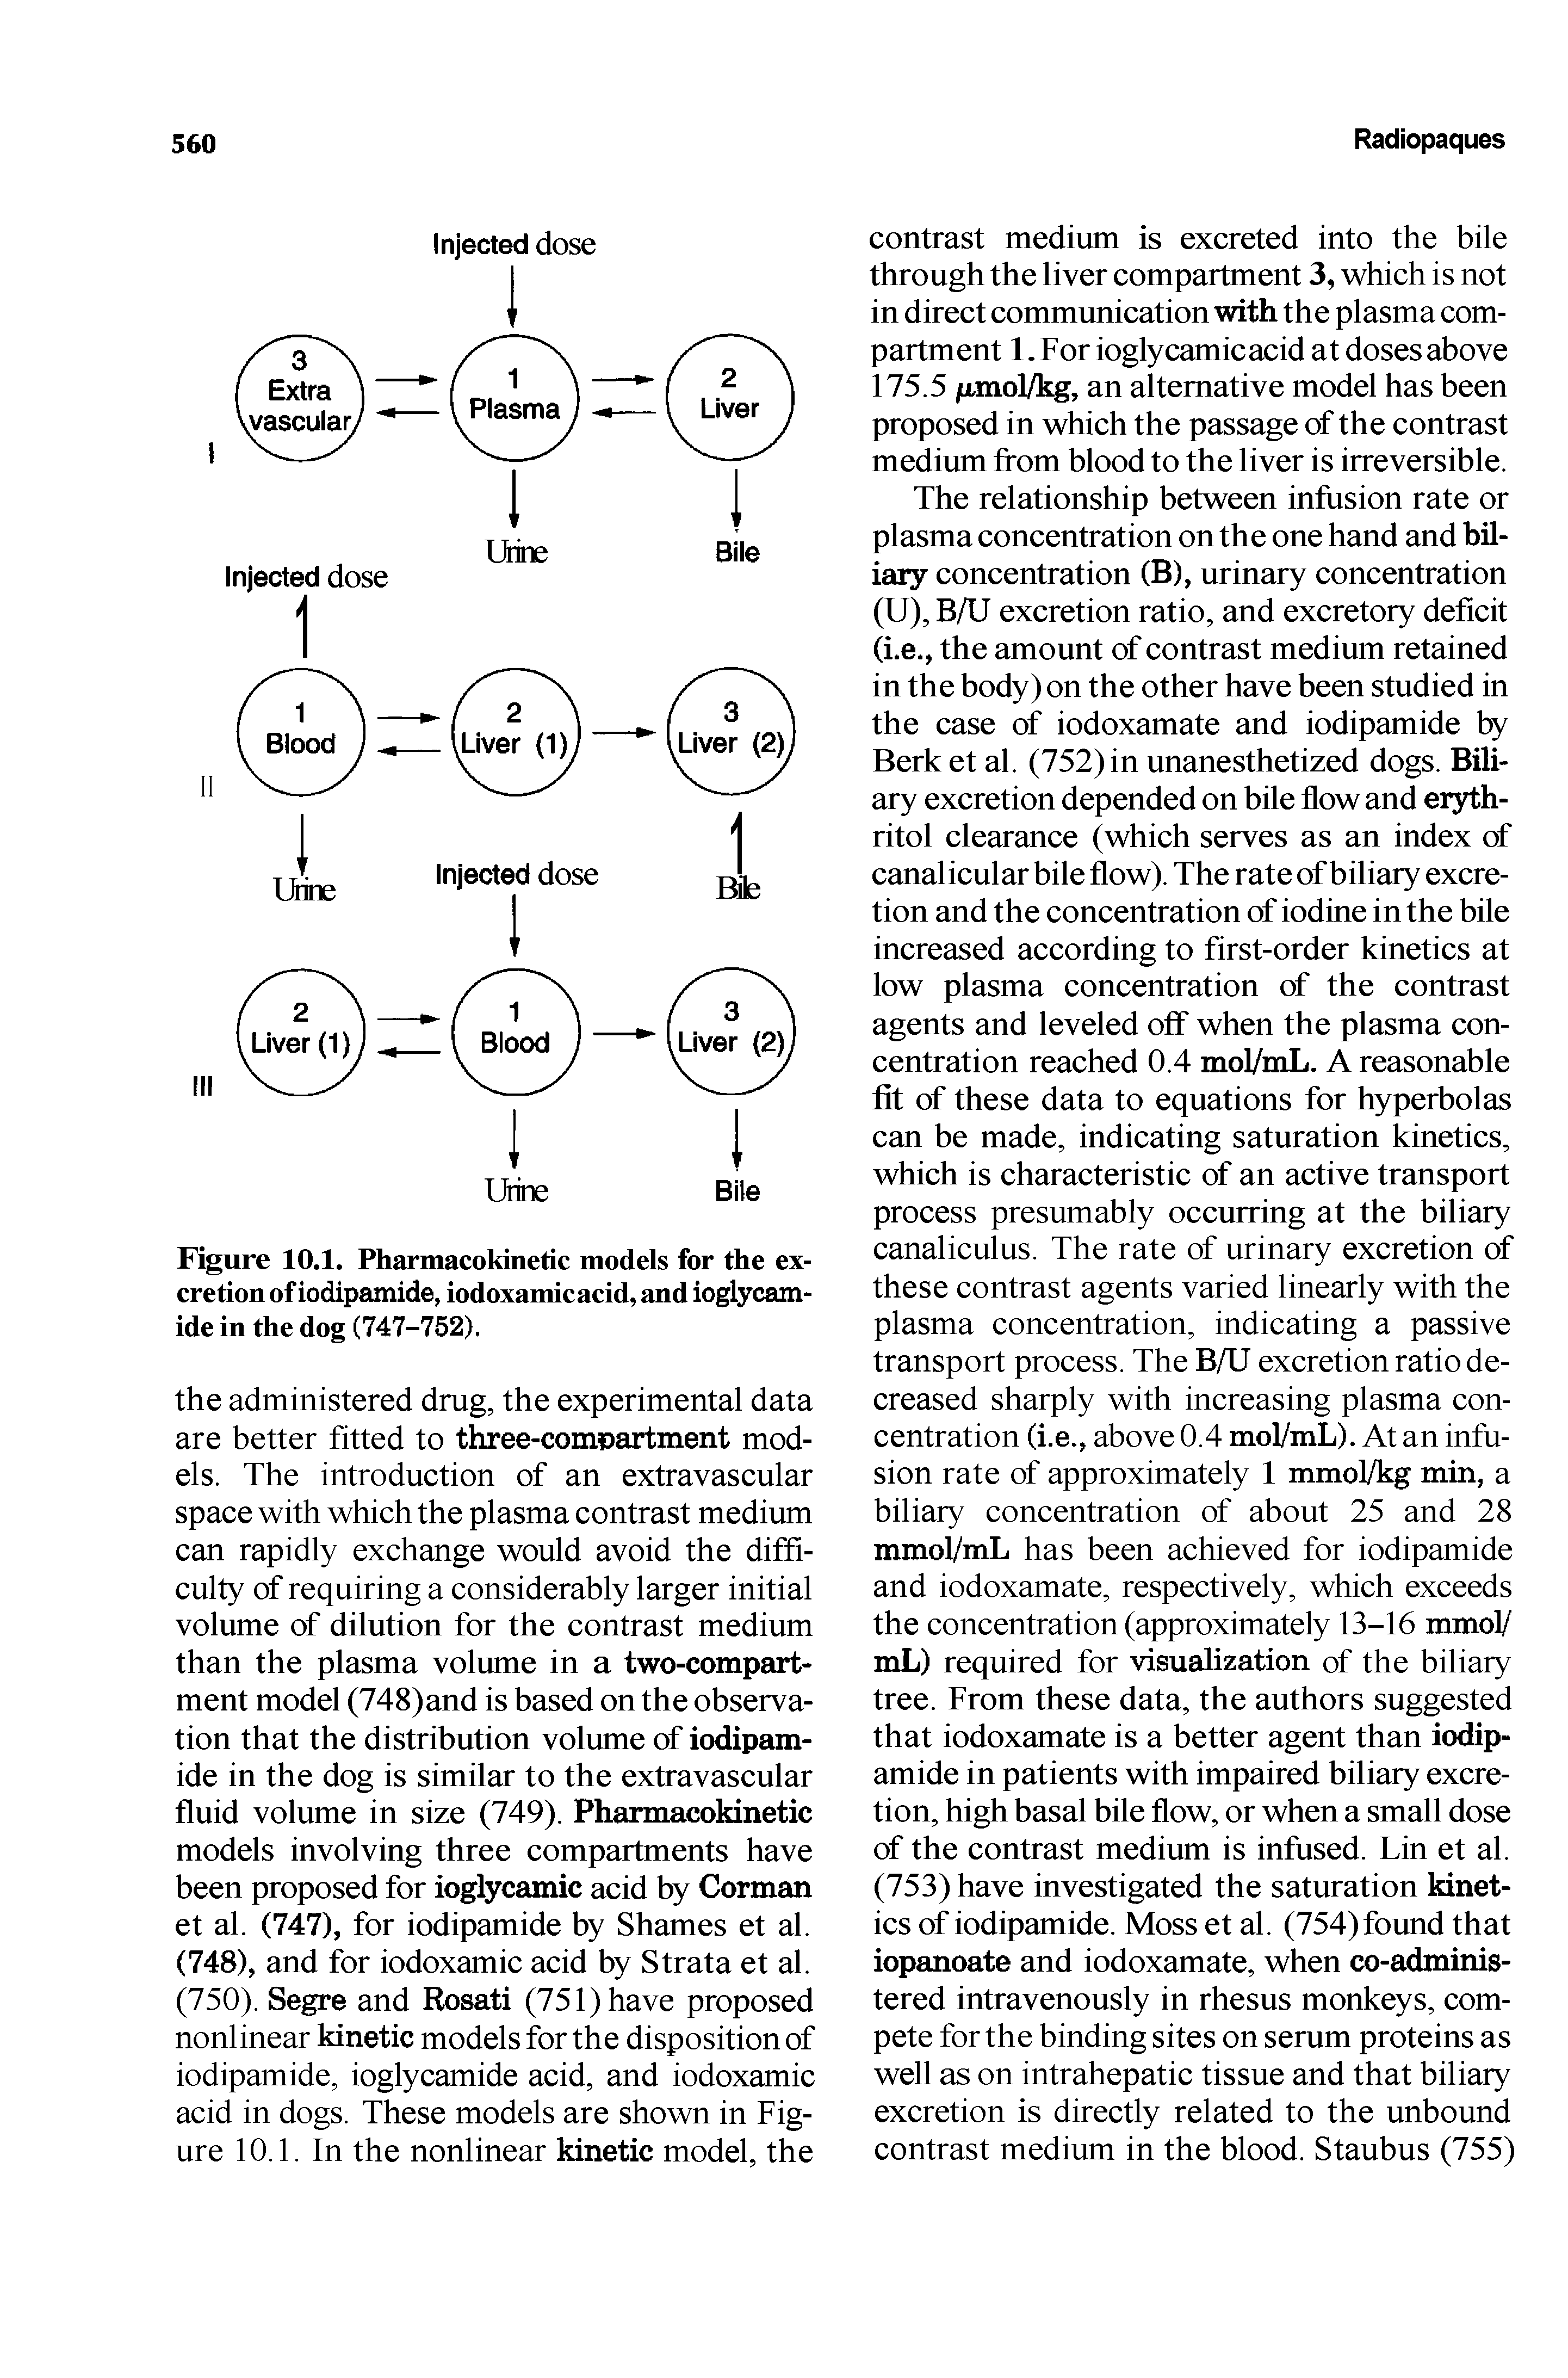 Figure 10.1. Pharmacokinetic models for the excretion of iodipamide, iodoxamicacid, and ioglycam-ide in the dog (747-752).